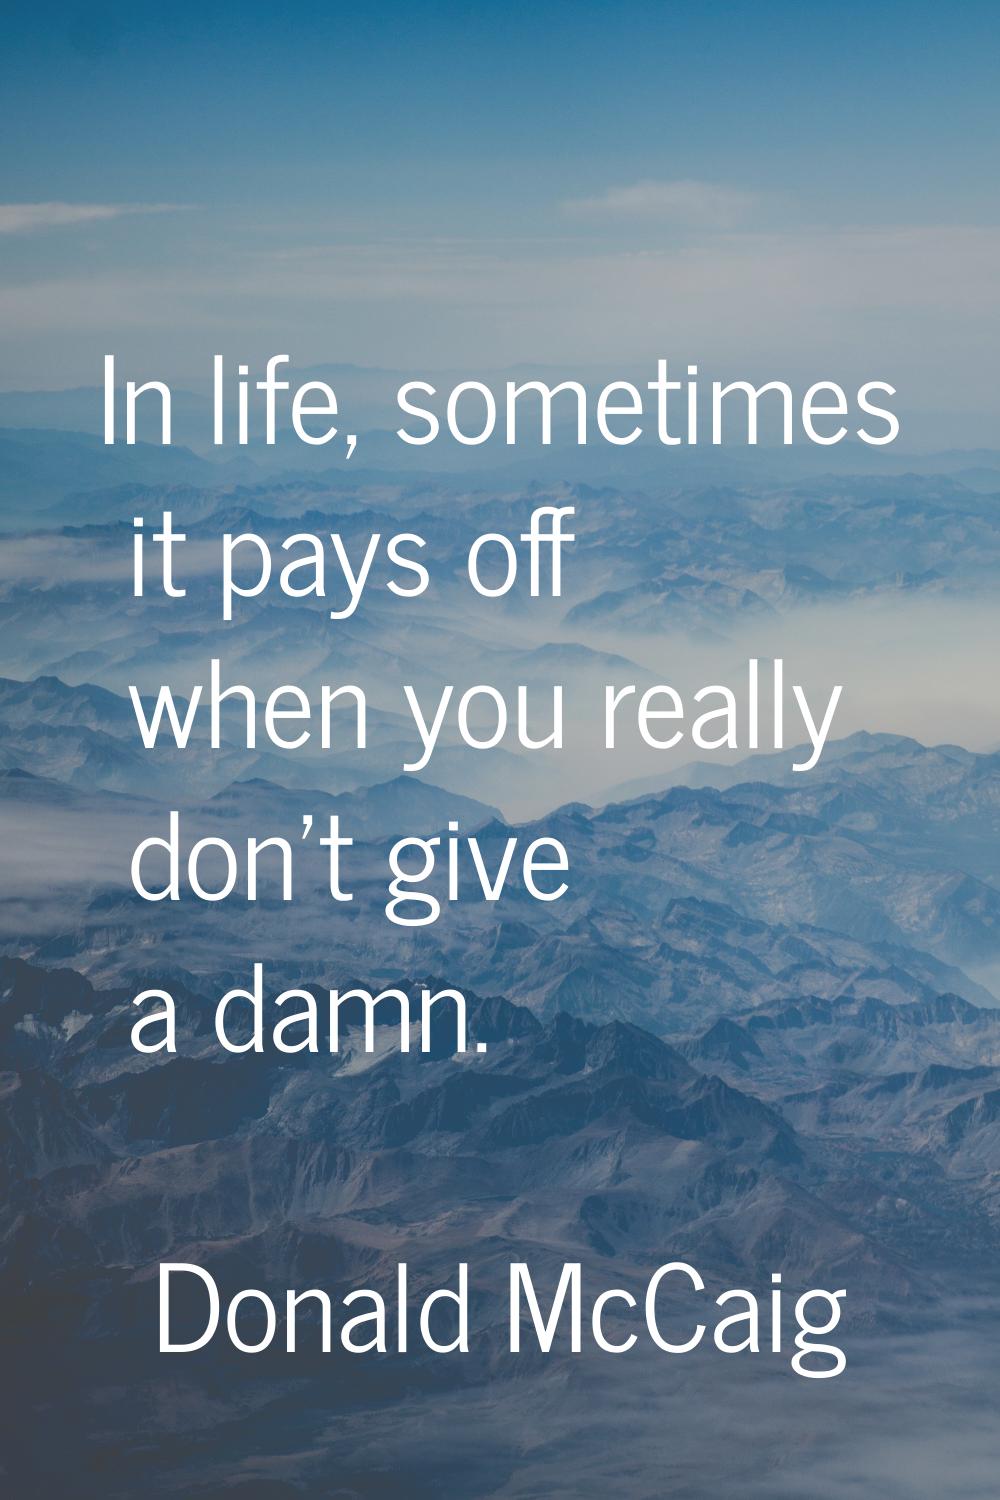 In life, sometimes it pays off when you really don't give a damn.